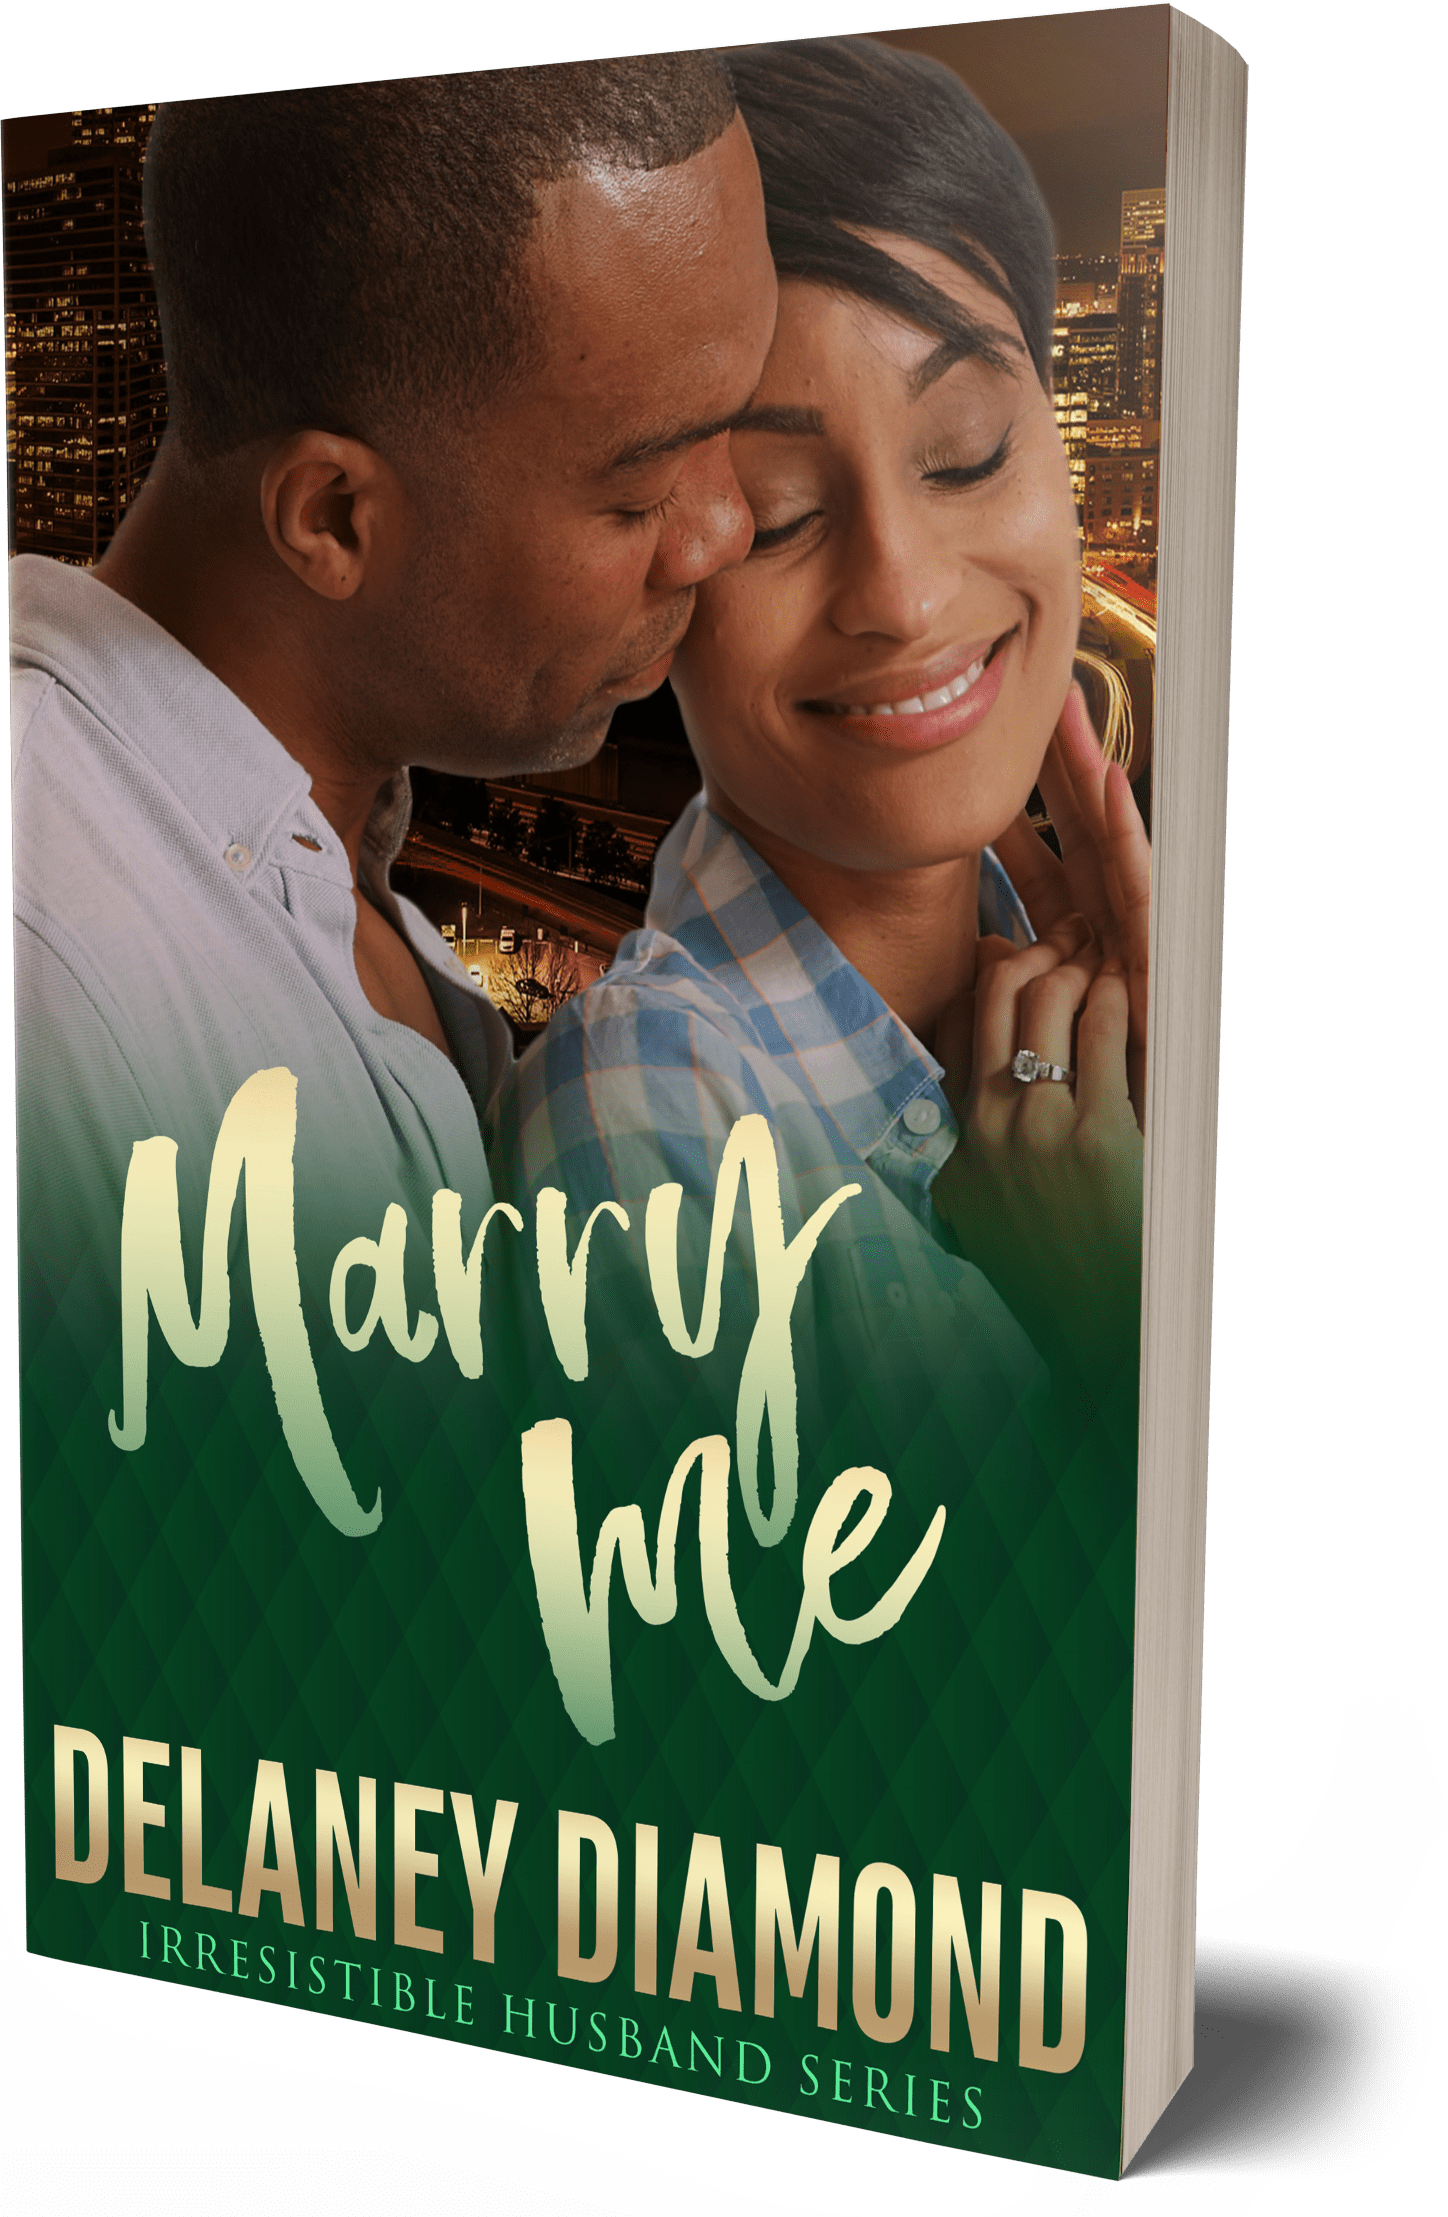 man and woman on green cover with cityscape